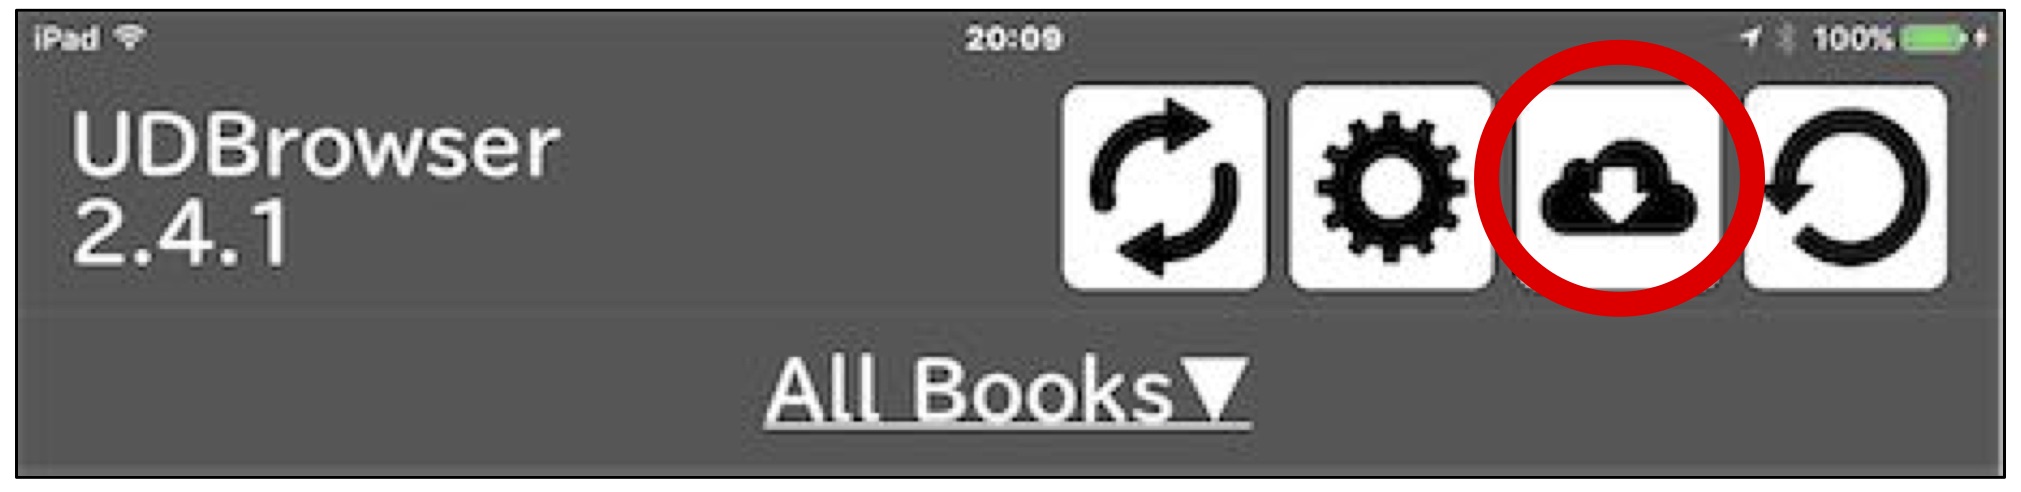 Figure 35  Library “Cloud” Icon